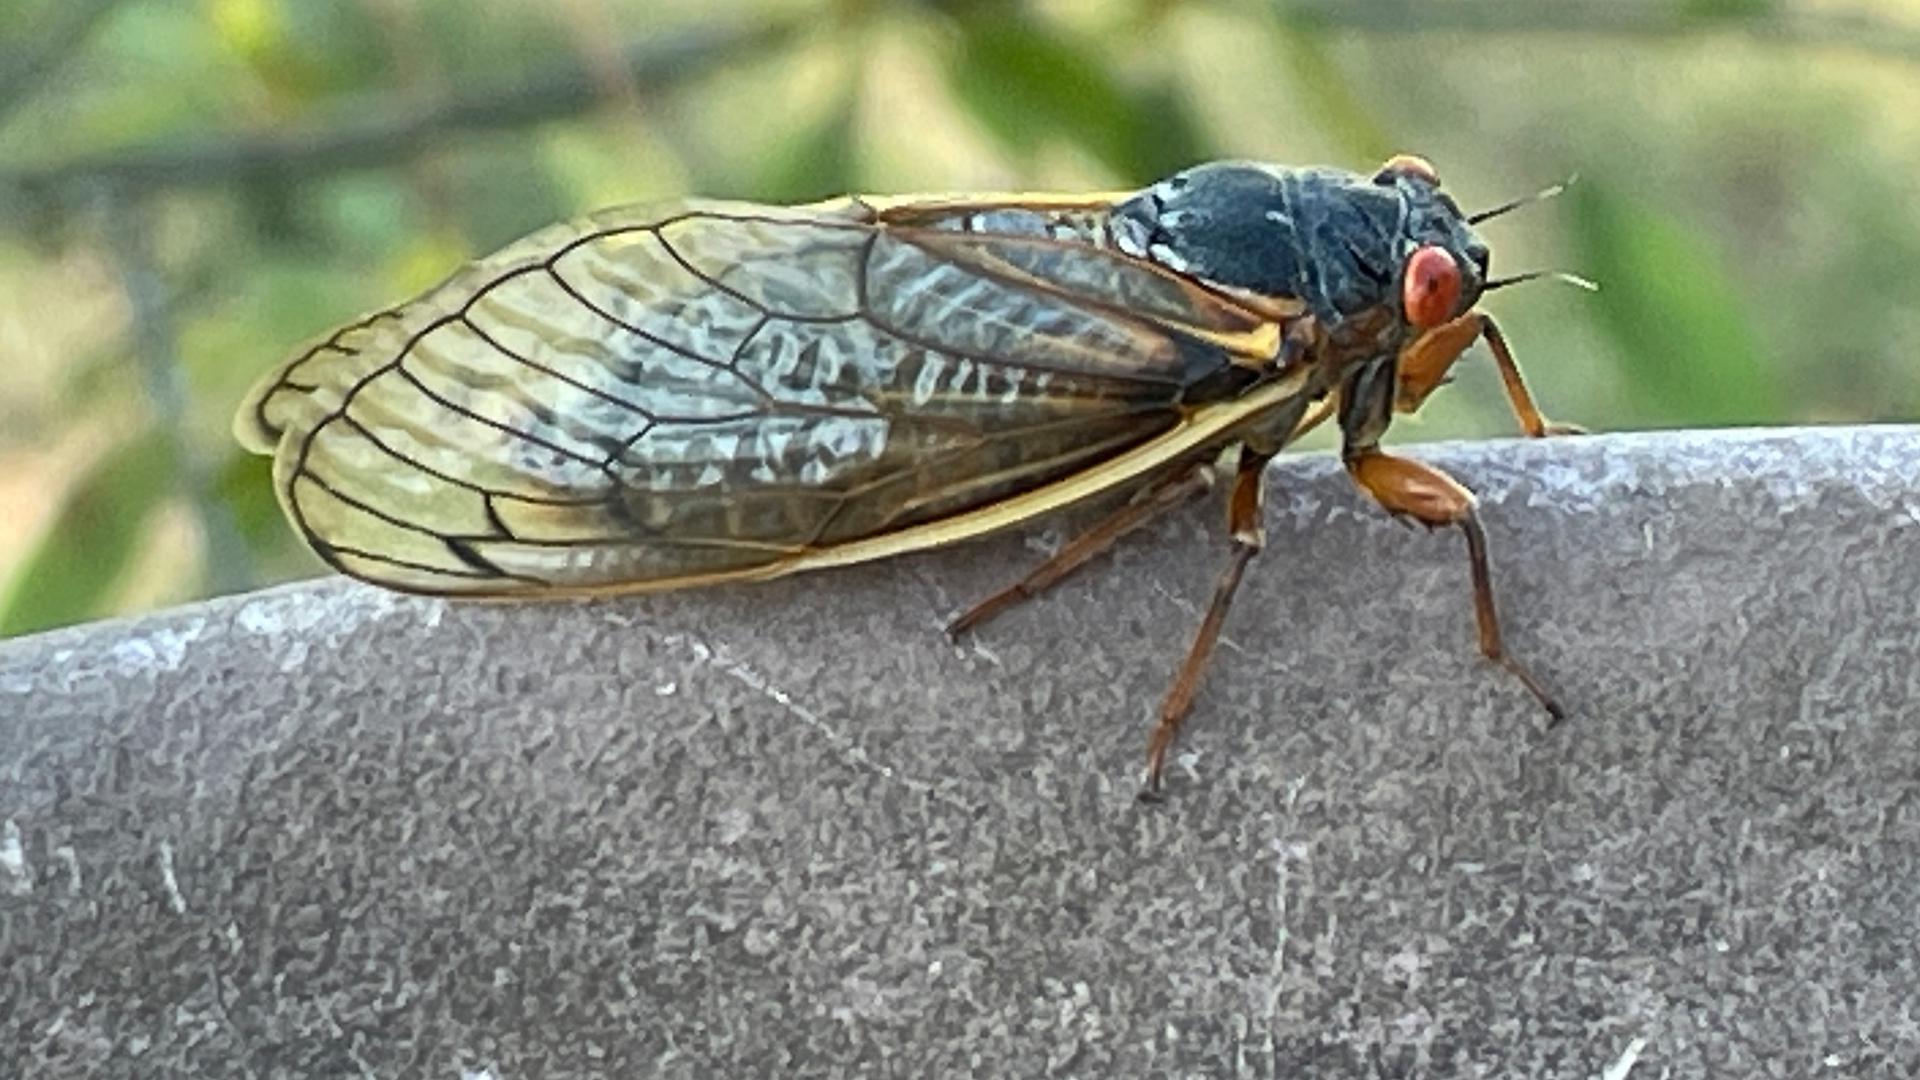 How to protect your yard, garden as cicada broods emerge